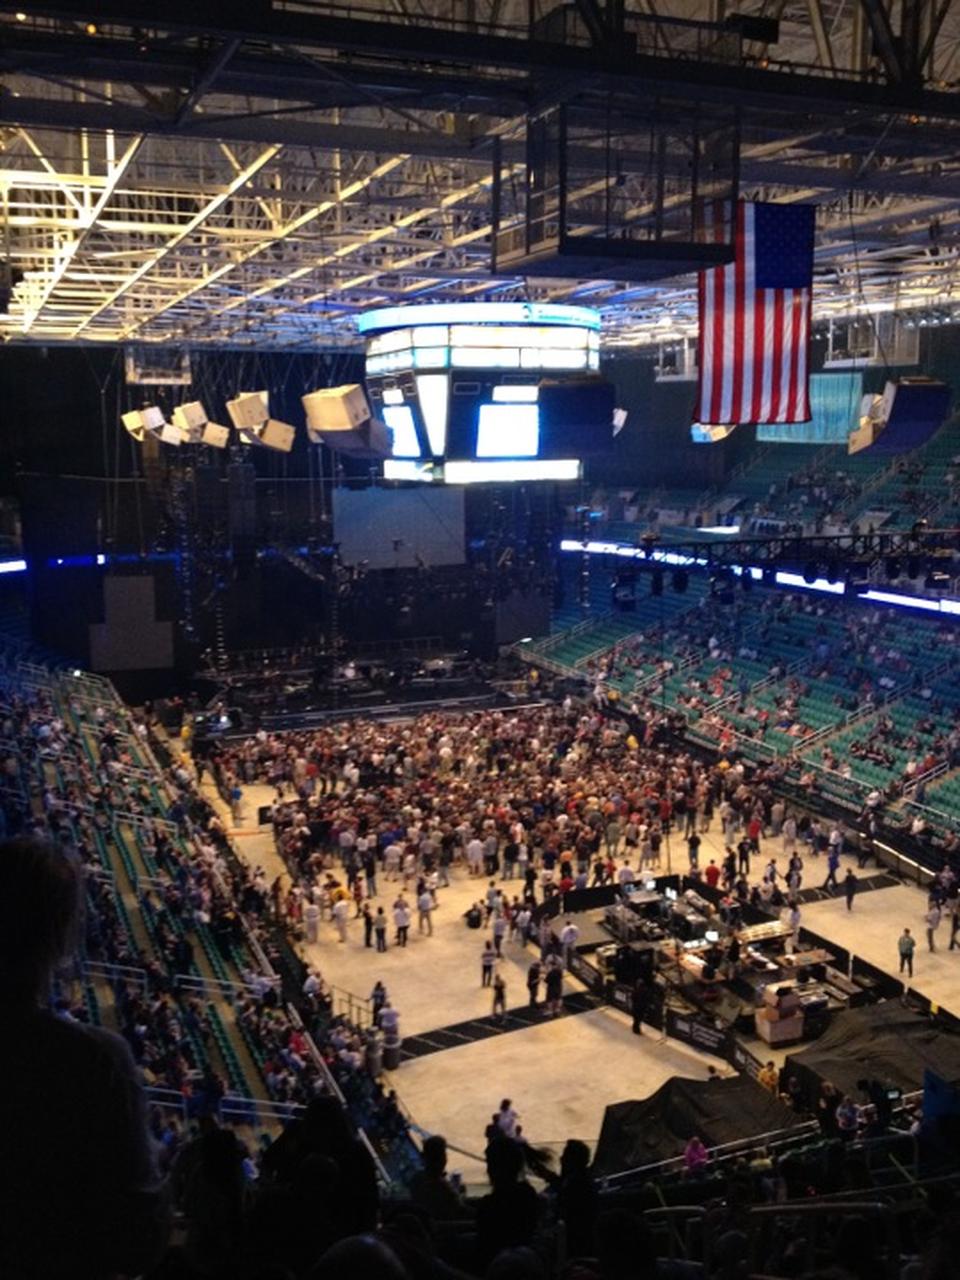 Section 219 at Greensboro Coliseum for Concerts